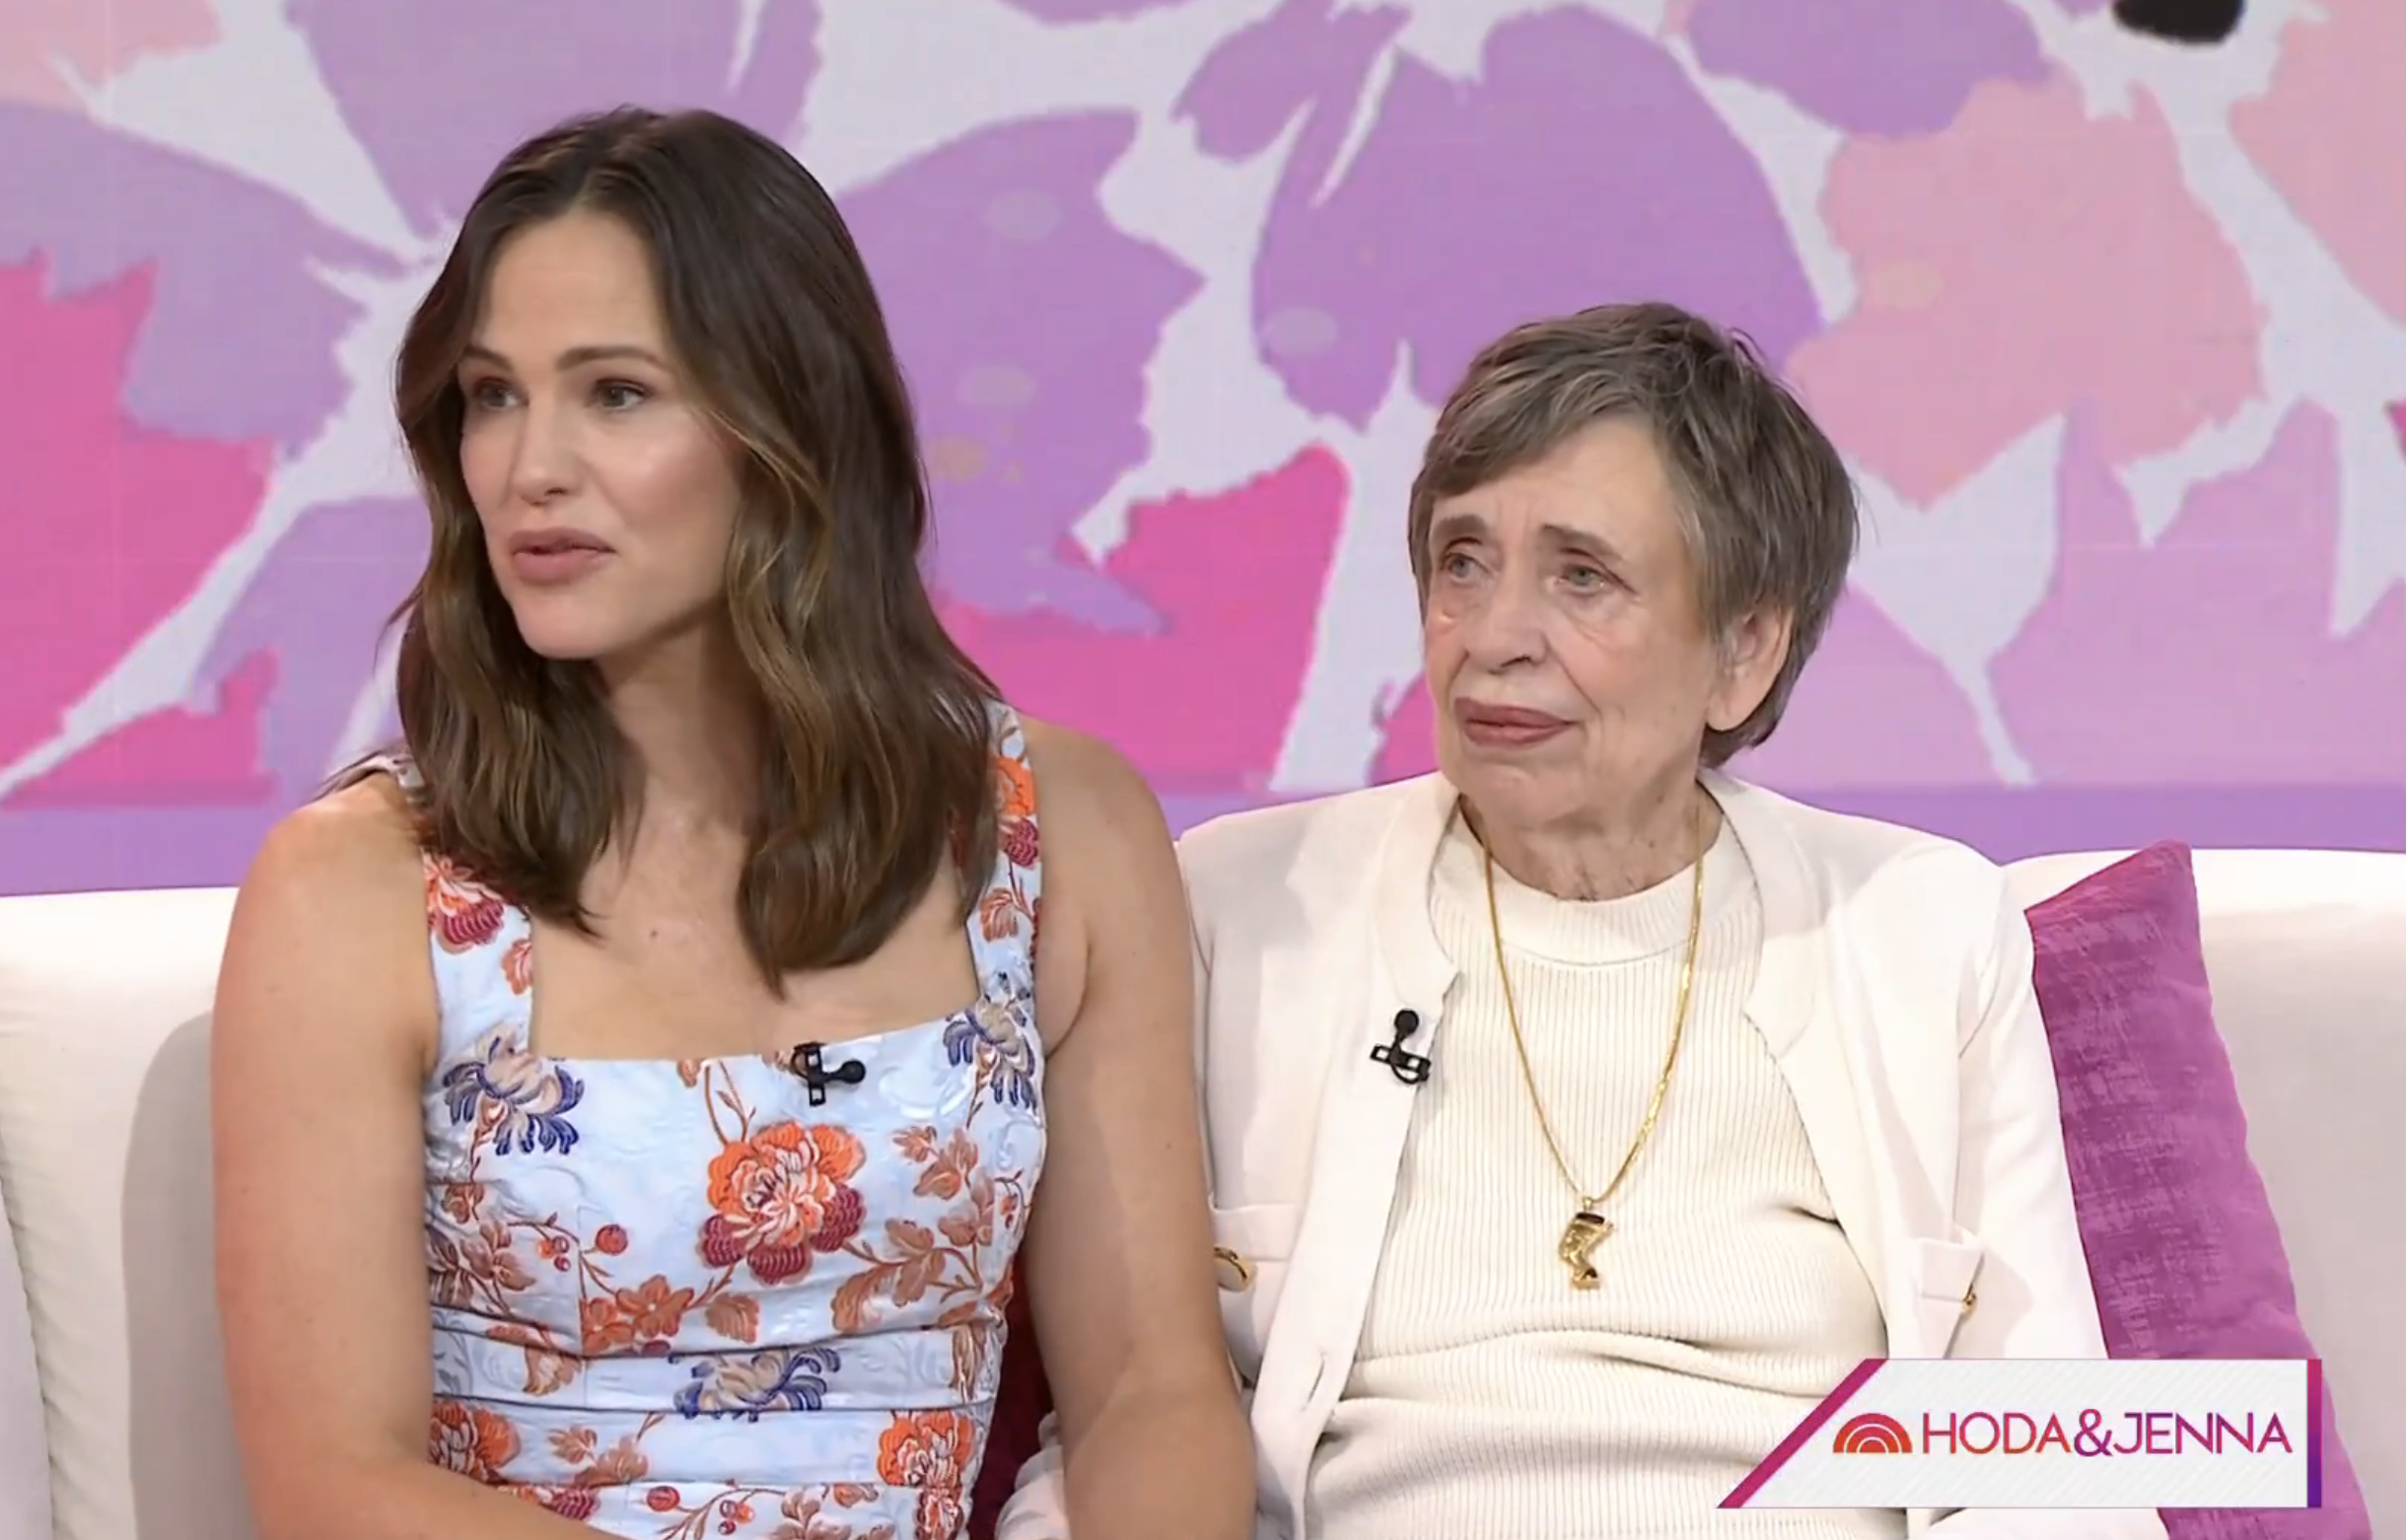 Jennifer Garner and her mother are seated on a talk show set, with the &quot;Hoda &amp;amp; Jenna&quot; logo visible in the corner. Jennifer is wearing a floral dress